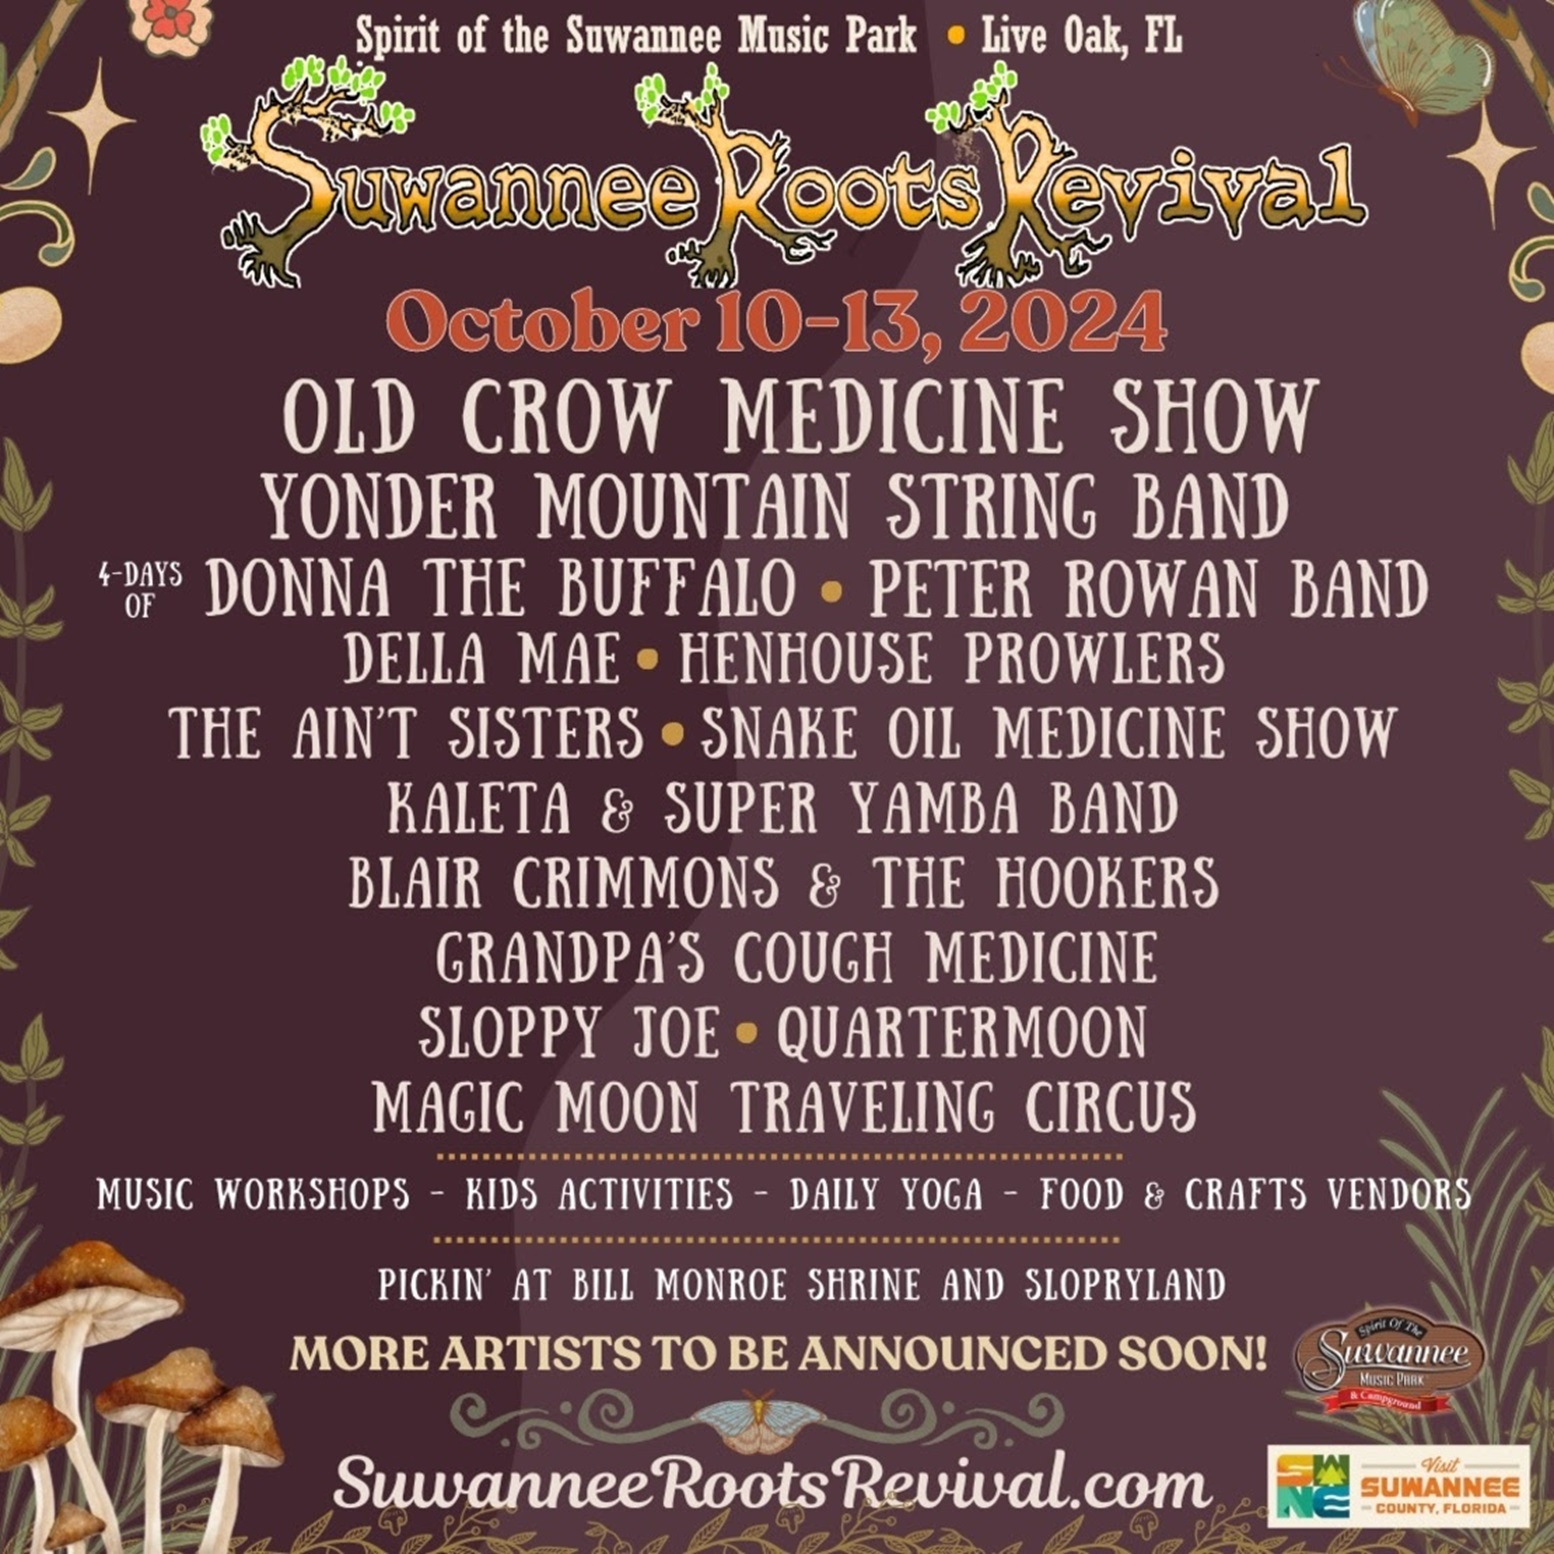 Suwannee Roots Revival Announces Old Crow Medicine Show, Yonder Mountain String Band, Donna the Buffalo - Oct 10-13